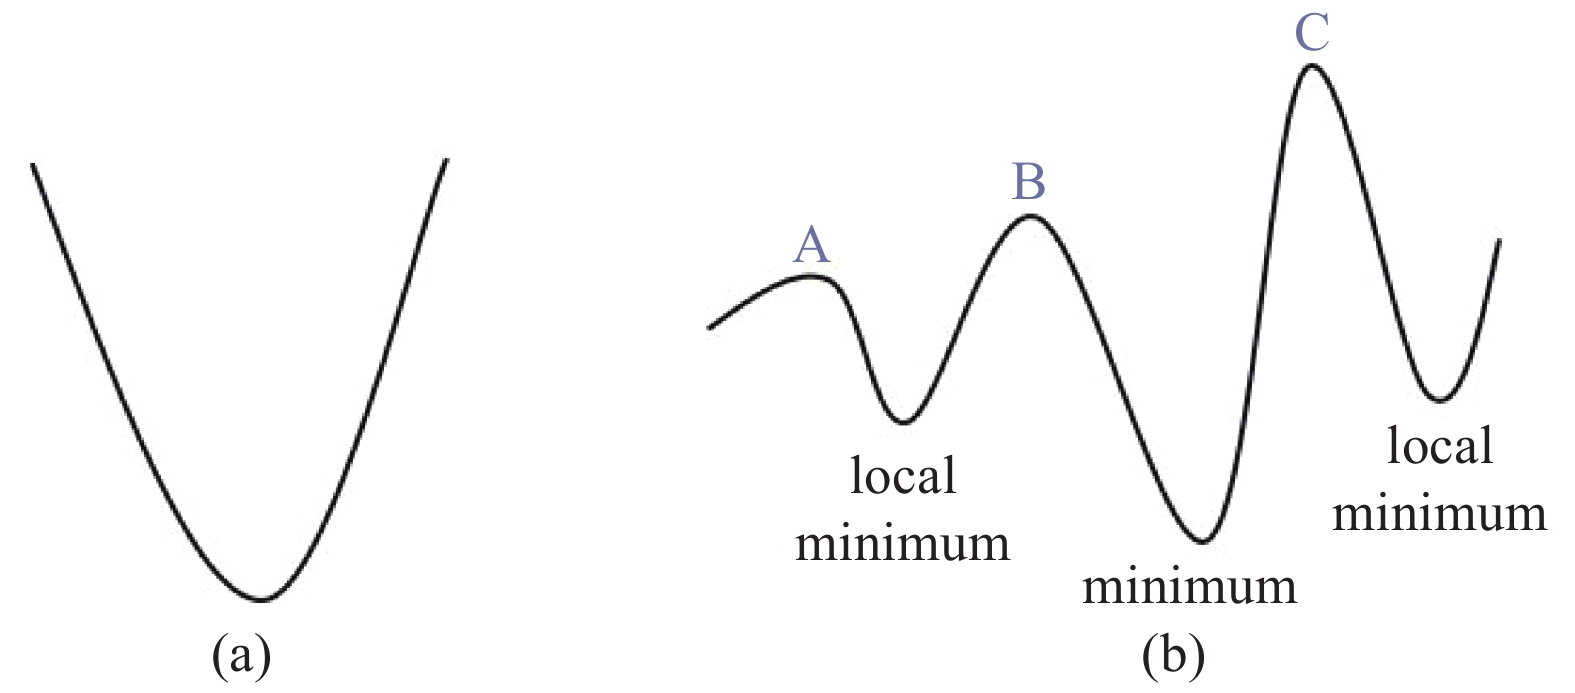 Schematic diagram of cost function with single extremum (a) and multiple extremum (b)